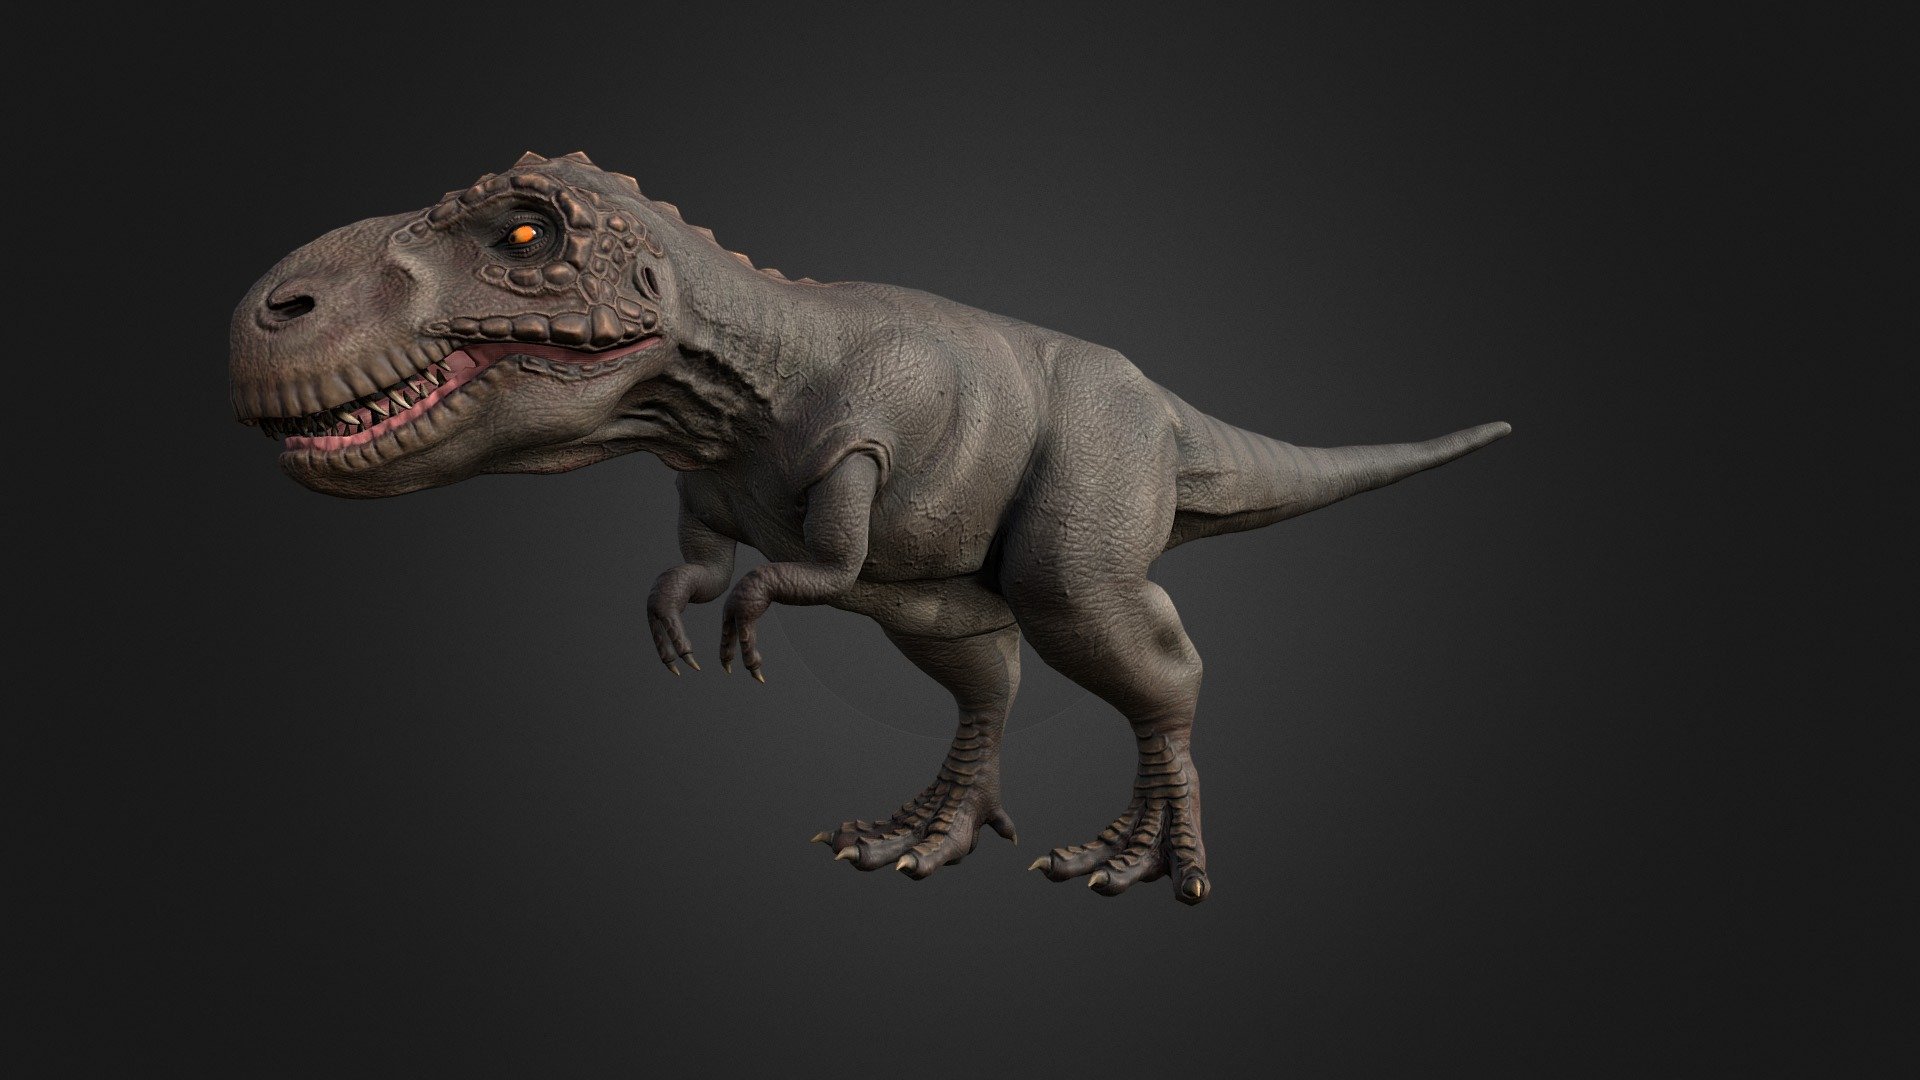 This asset has Tyrannosaurus model.

Model has 4 LOD.


24550 tris
16850 tris
10550 tris
5900 tris

Diffuse, normal and metallic / roughness maps (all maps 2048x2048).

105 animations (IP/RM)

Attack(1-6), Walk (F,FL,FR,B,BL,BR), Run (F,FL,FR),Run_attack(1-2), Run_Jump, Trot (F,FL,FR), Trot_Attack(1-2), Swim (F,FL,FR,), Swim_Idle, Swim_turn(Left/Right), Jump_In_Place, Jump_F, Jump (start/landing), Jump_Loop (up, horisontal, down),Hit (F,M,B)(1-2) , Lie (Start/end), Lie_Idle, Sleep (start, idle, end),Sit_Idle (1-2), Sit (start/end), Idle 1-3,Roar 1-2,Roar (run/walk/trot), death (1-3), eat (1-2), pick up food (1-2),Drink start/end, Drink_Idle(1-2) ,Turn (left/right)(45/90*) etc.

If you have any questions, please contact us by mail: Chester9292@mail.ru - Tyrannosaurus - Buy Royalty Free 3D model by Darina3D 3d model